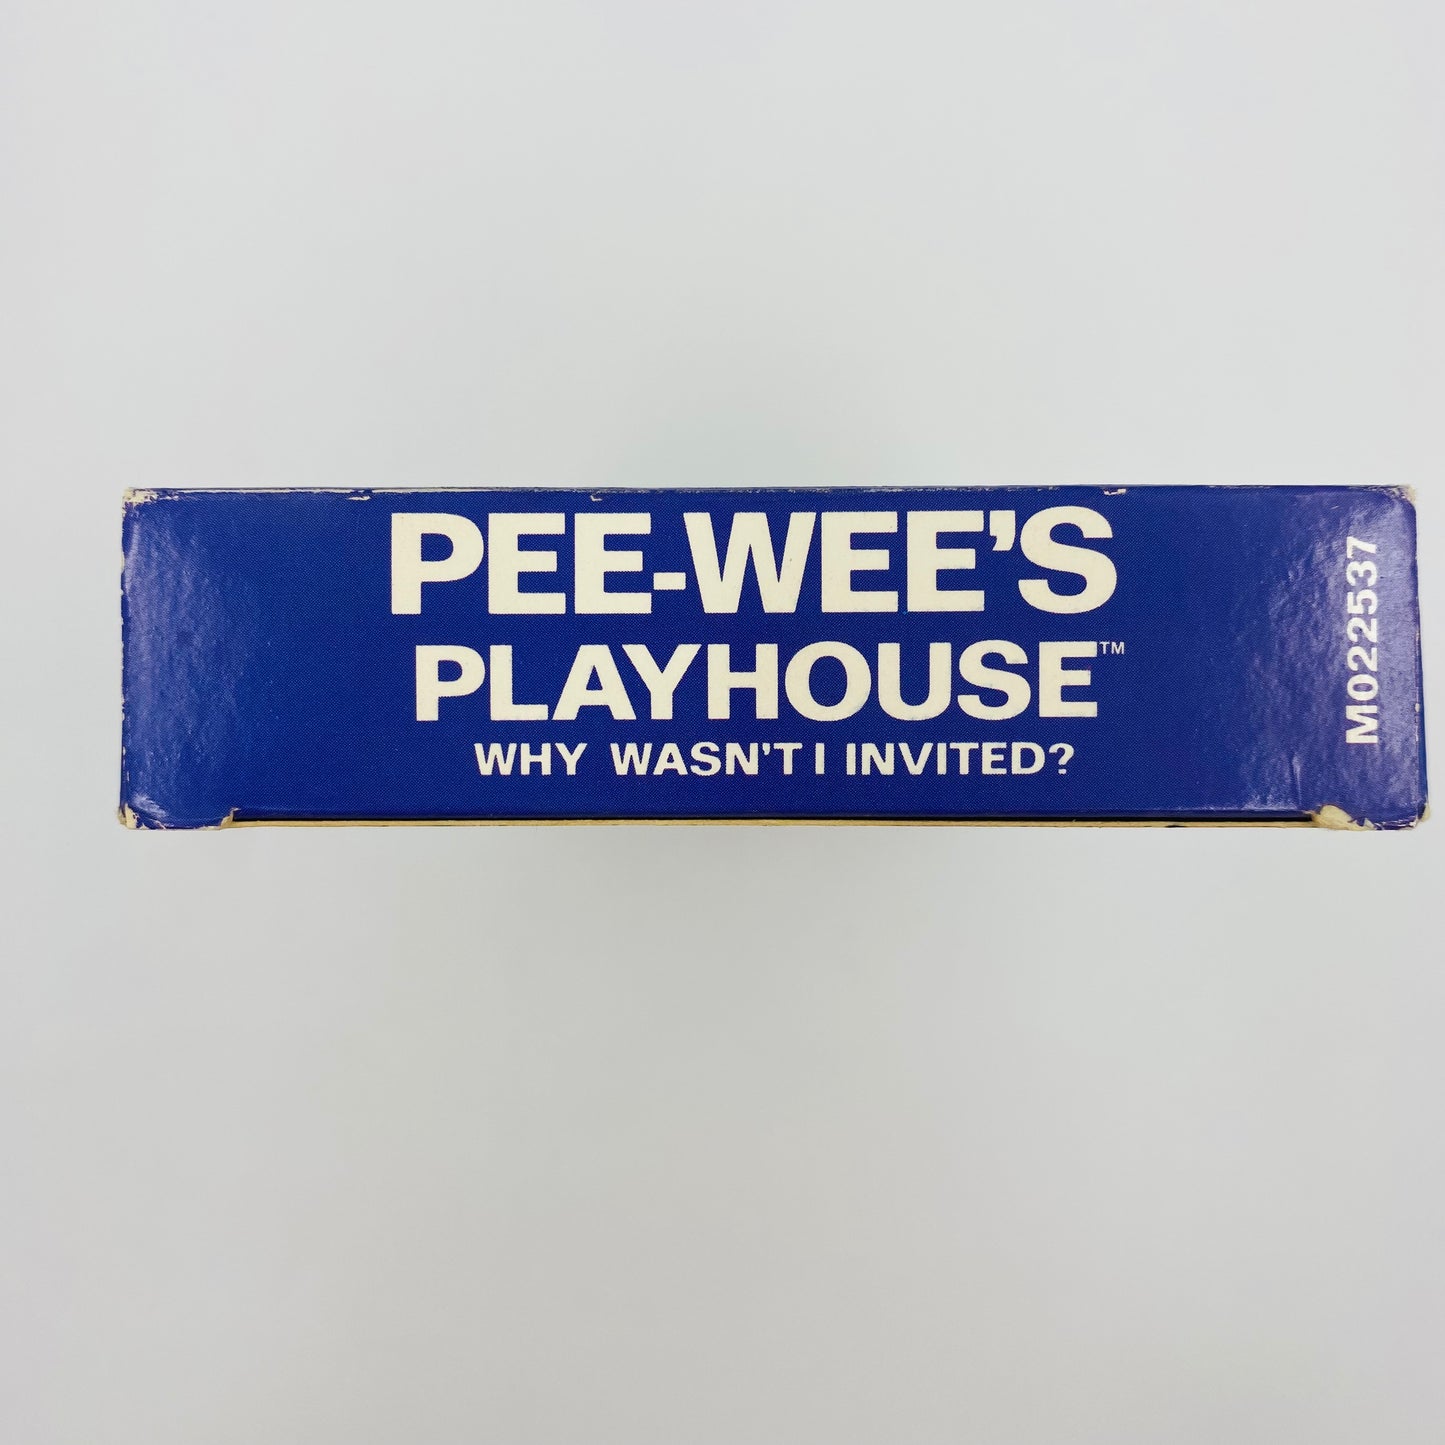 Pee-Wee’s Playhouse volume 15 Why Wasn’t I Invited VHS tape (1990) Hi-Tops Video